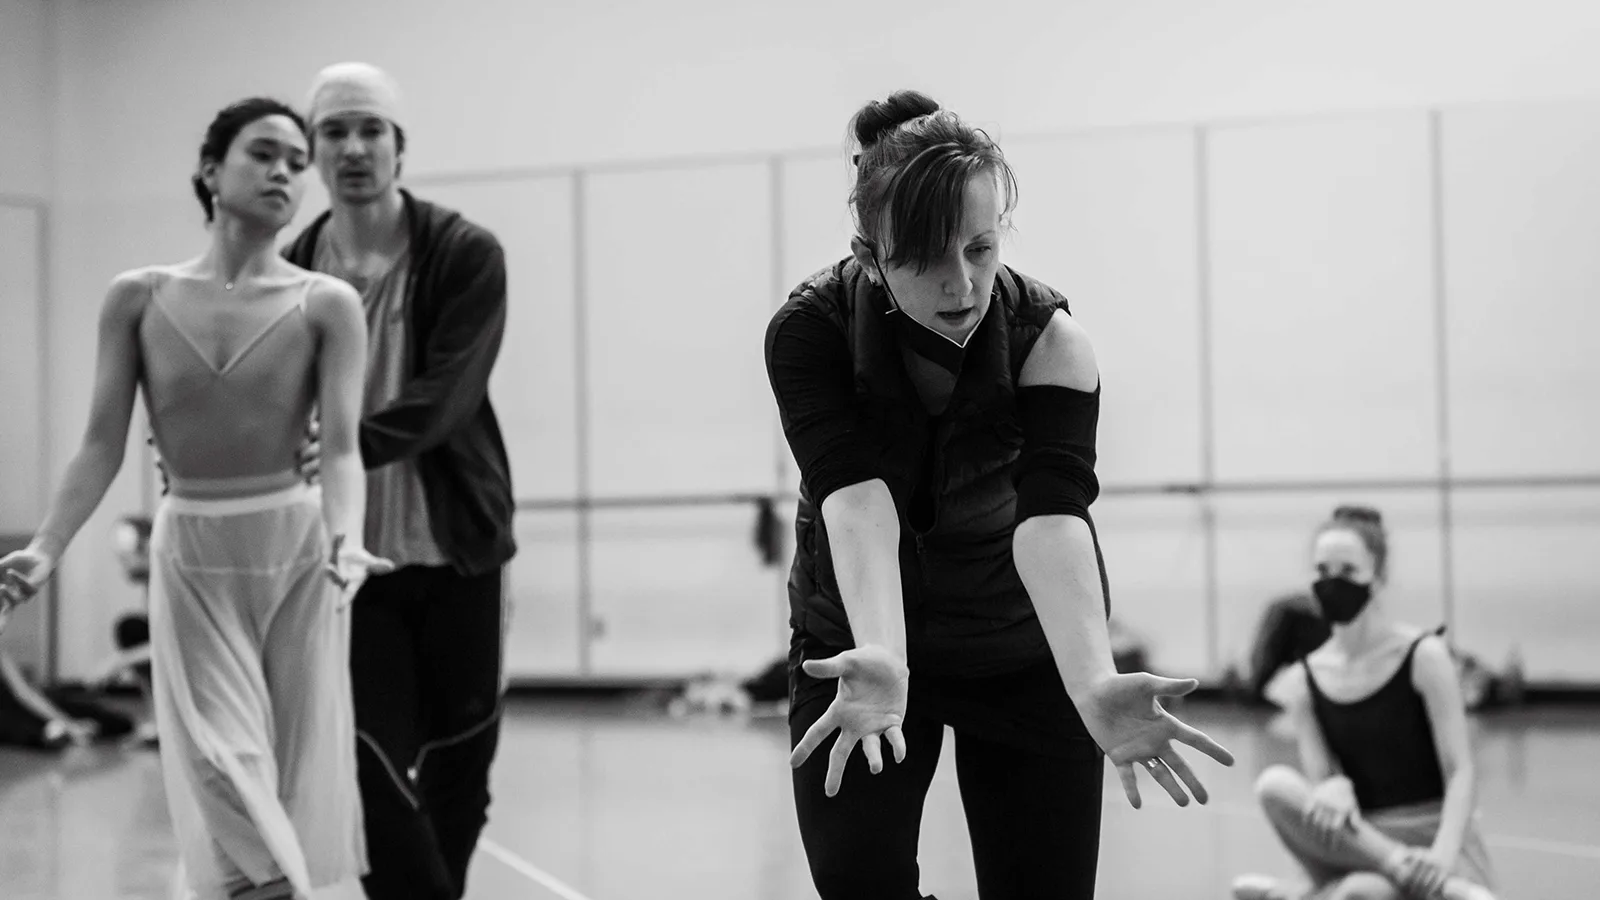 Choreographer Jessica Lang works with Angelica Generosa and James Yoichi Moore in a Pacific Northwest Ballet studio. The photo is in black and white.